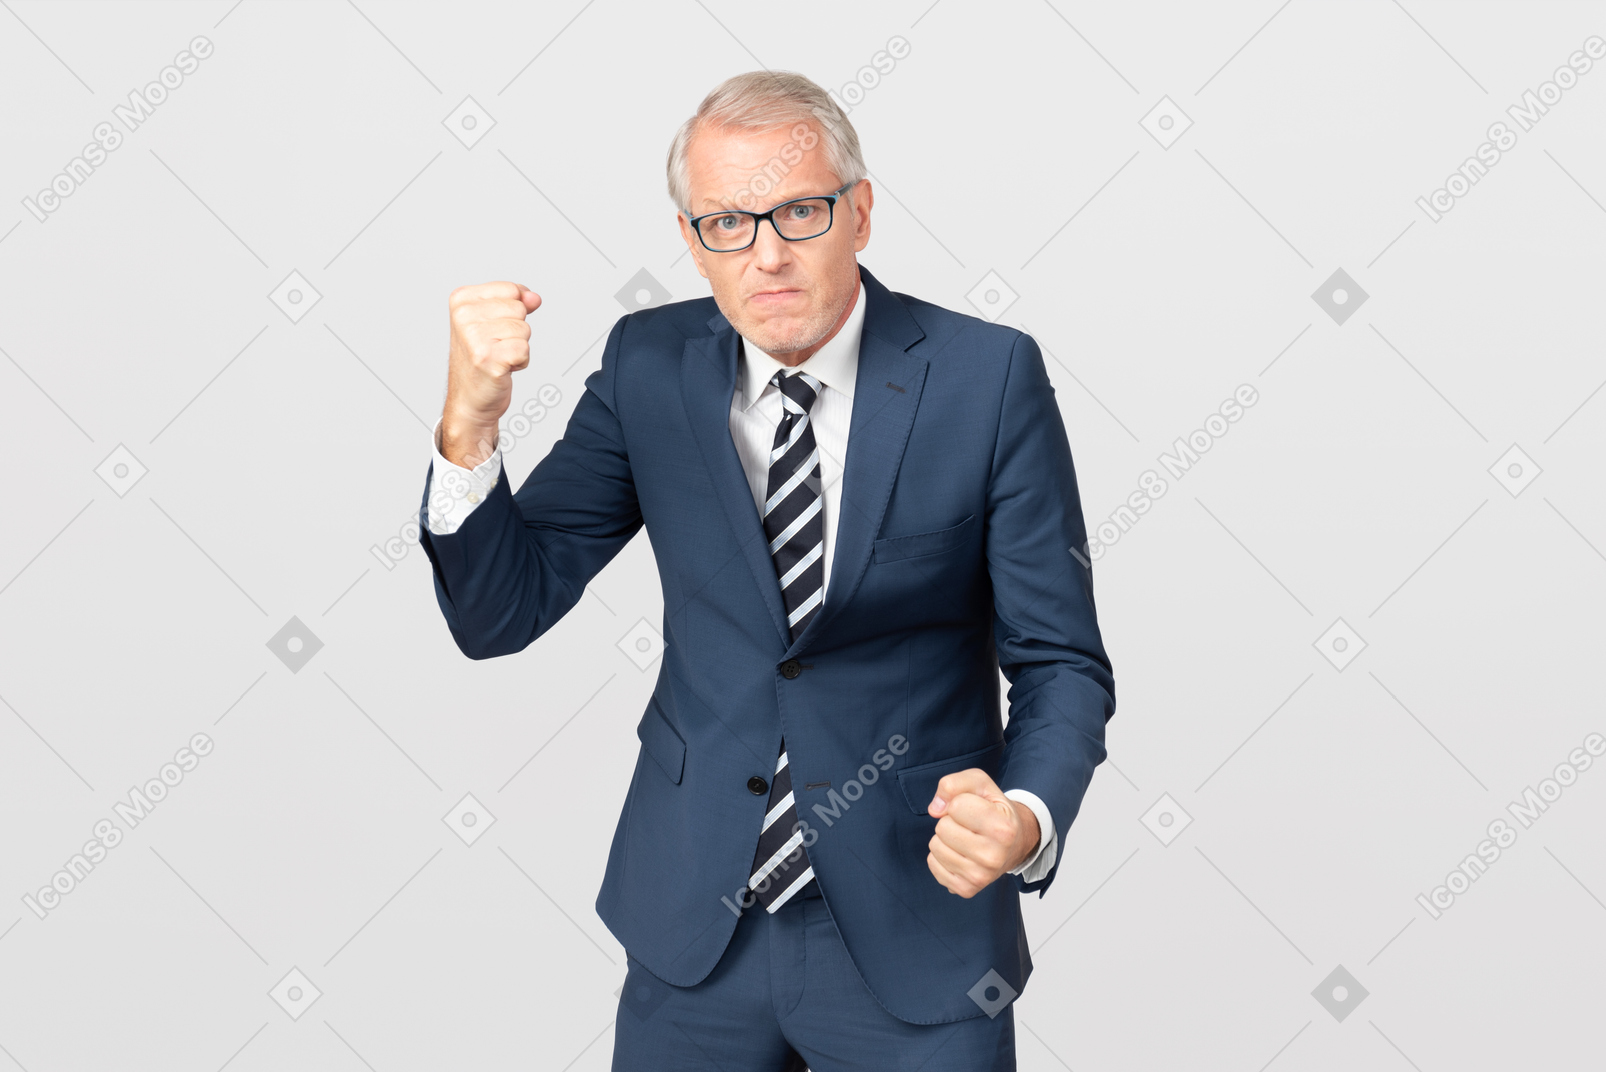 Angry middle aged businessman holding his fists up